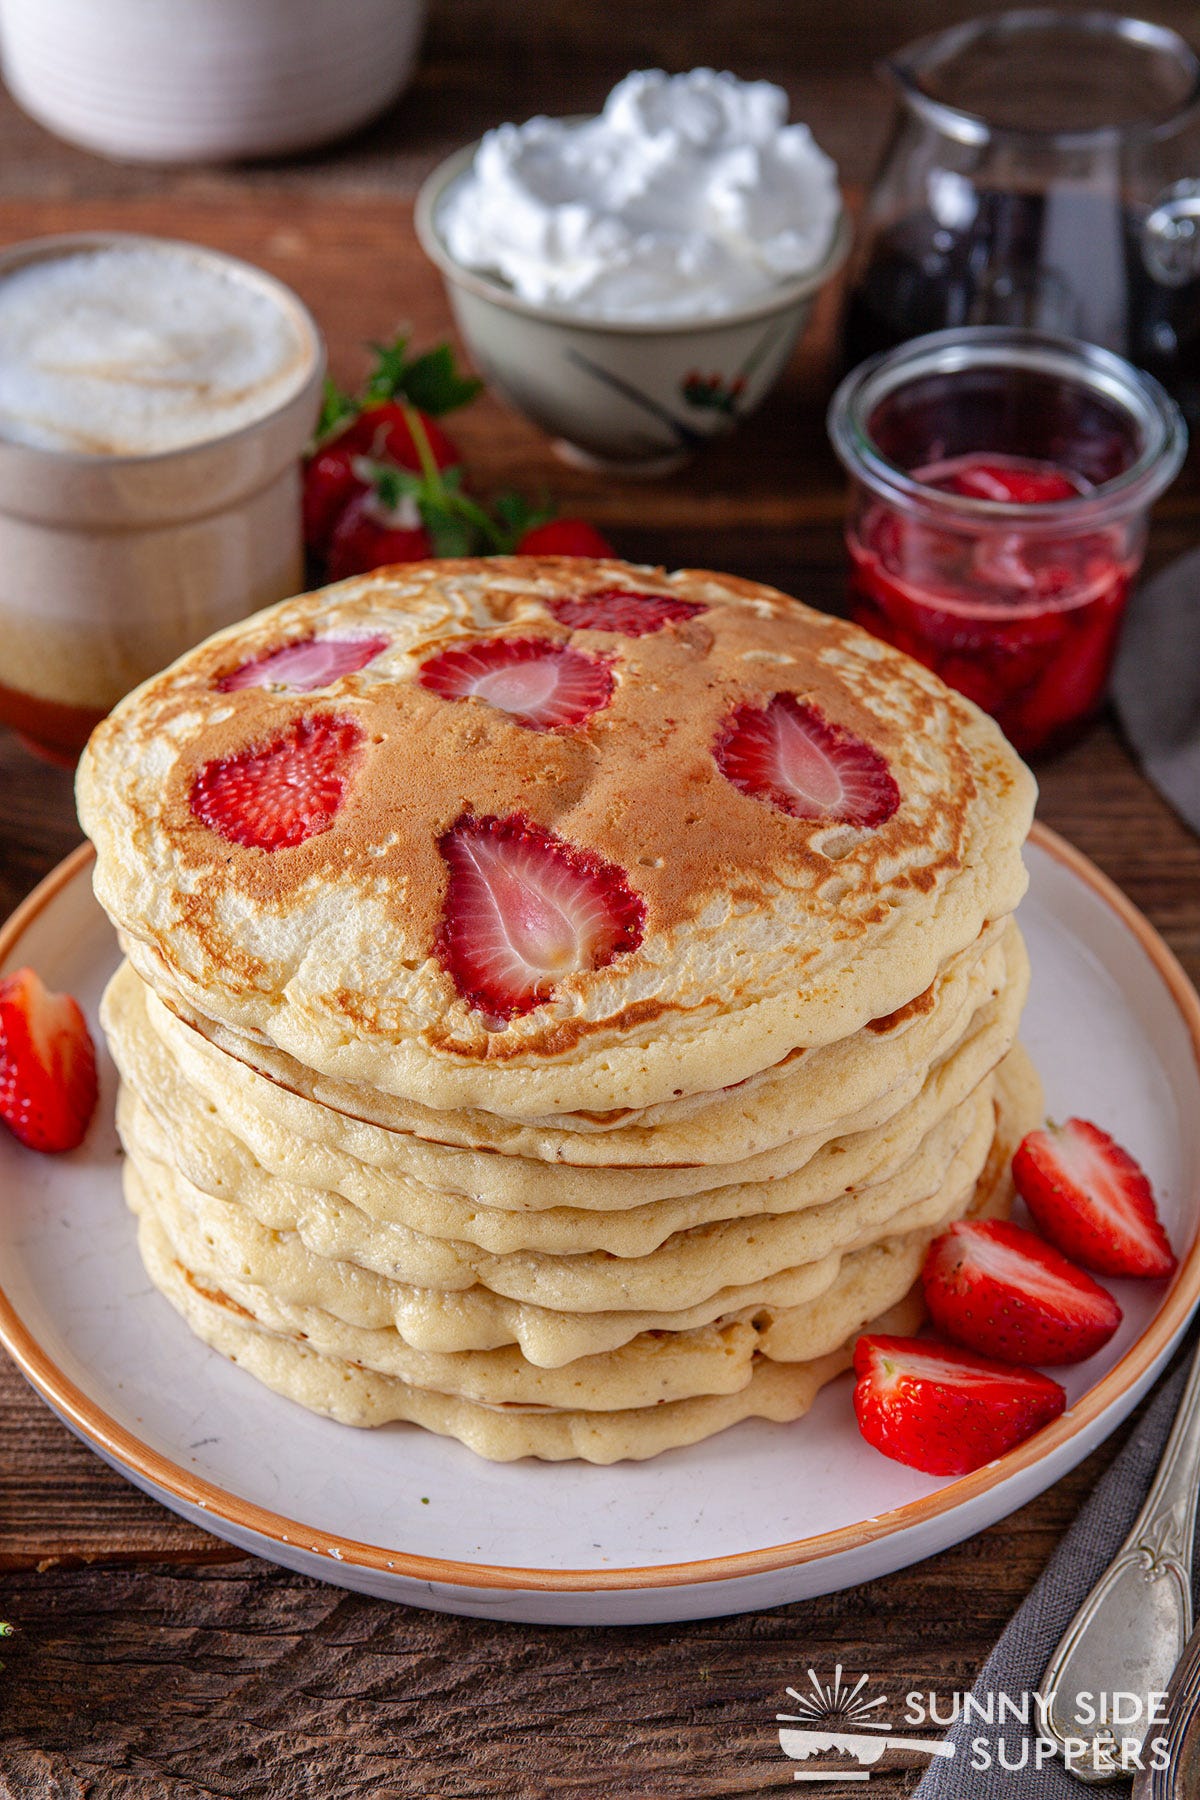 Strawberry slices nestled in pancakes.